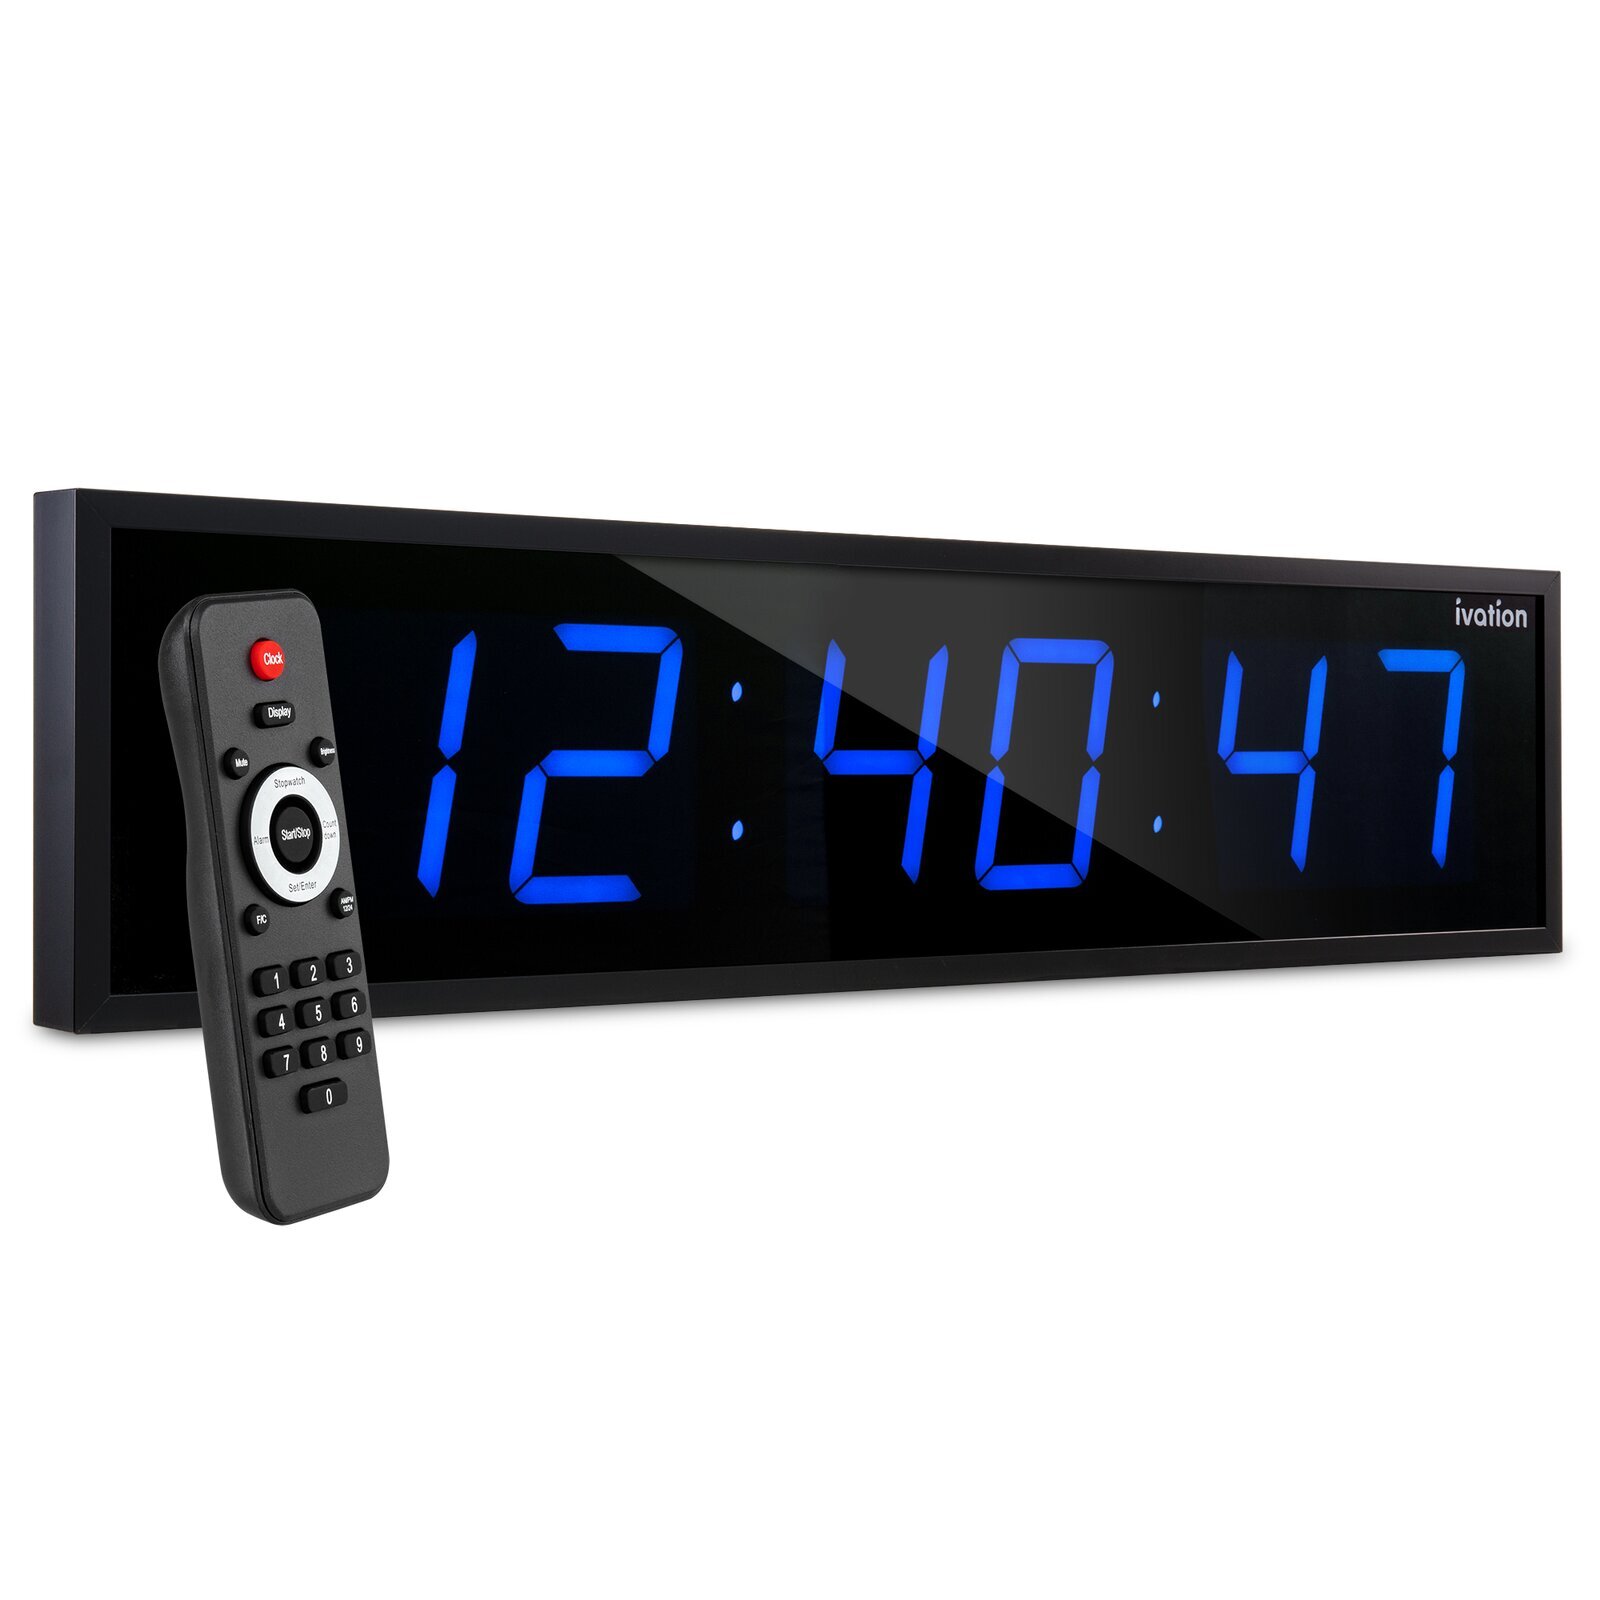 Remote Controlled Wall Clocks with Day and Date